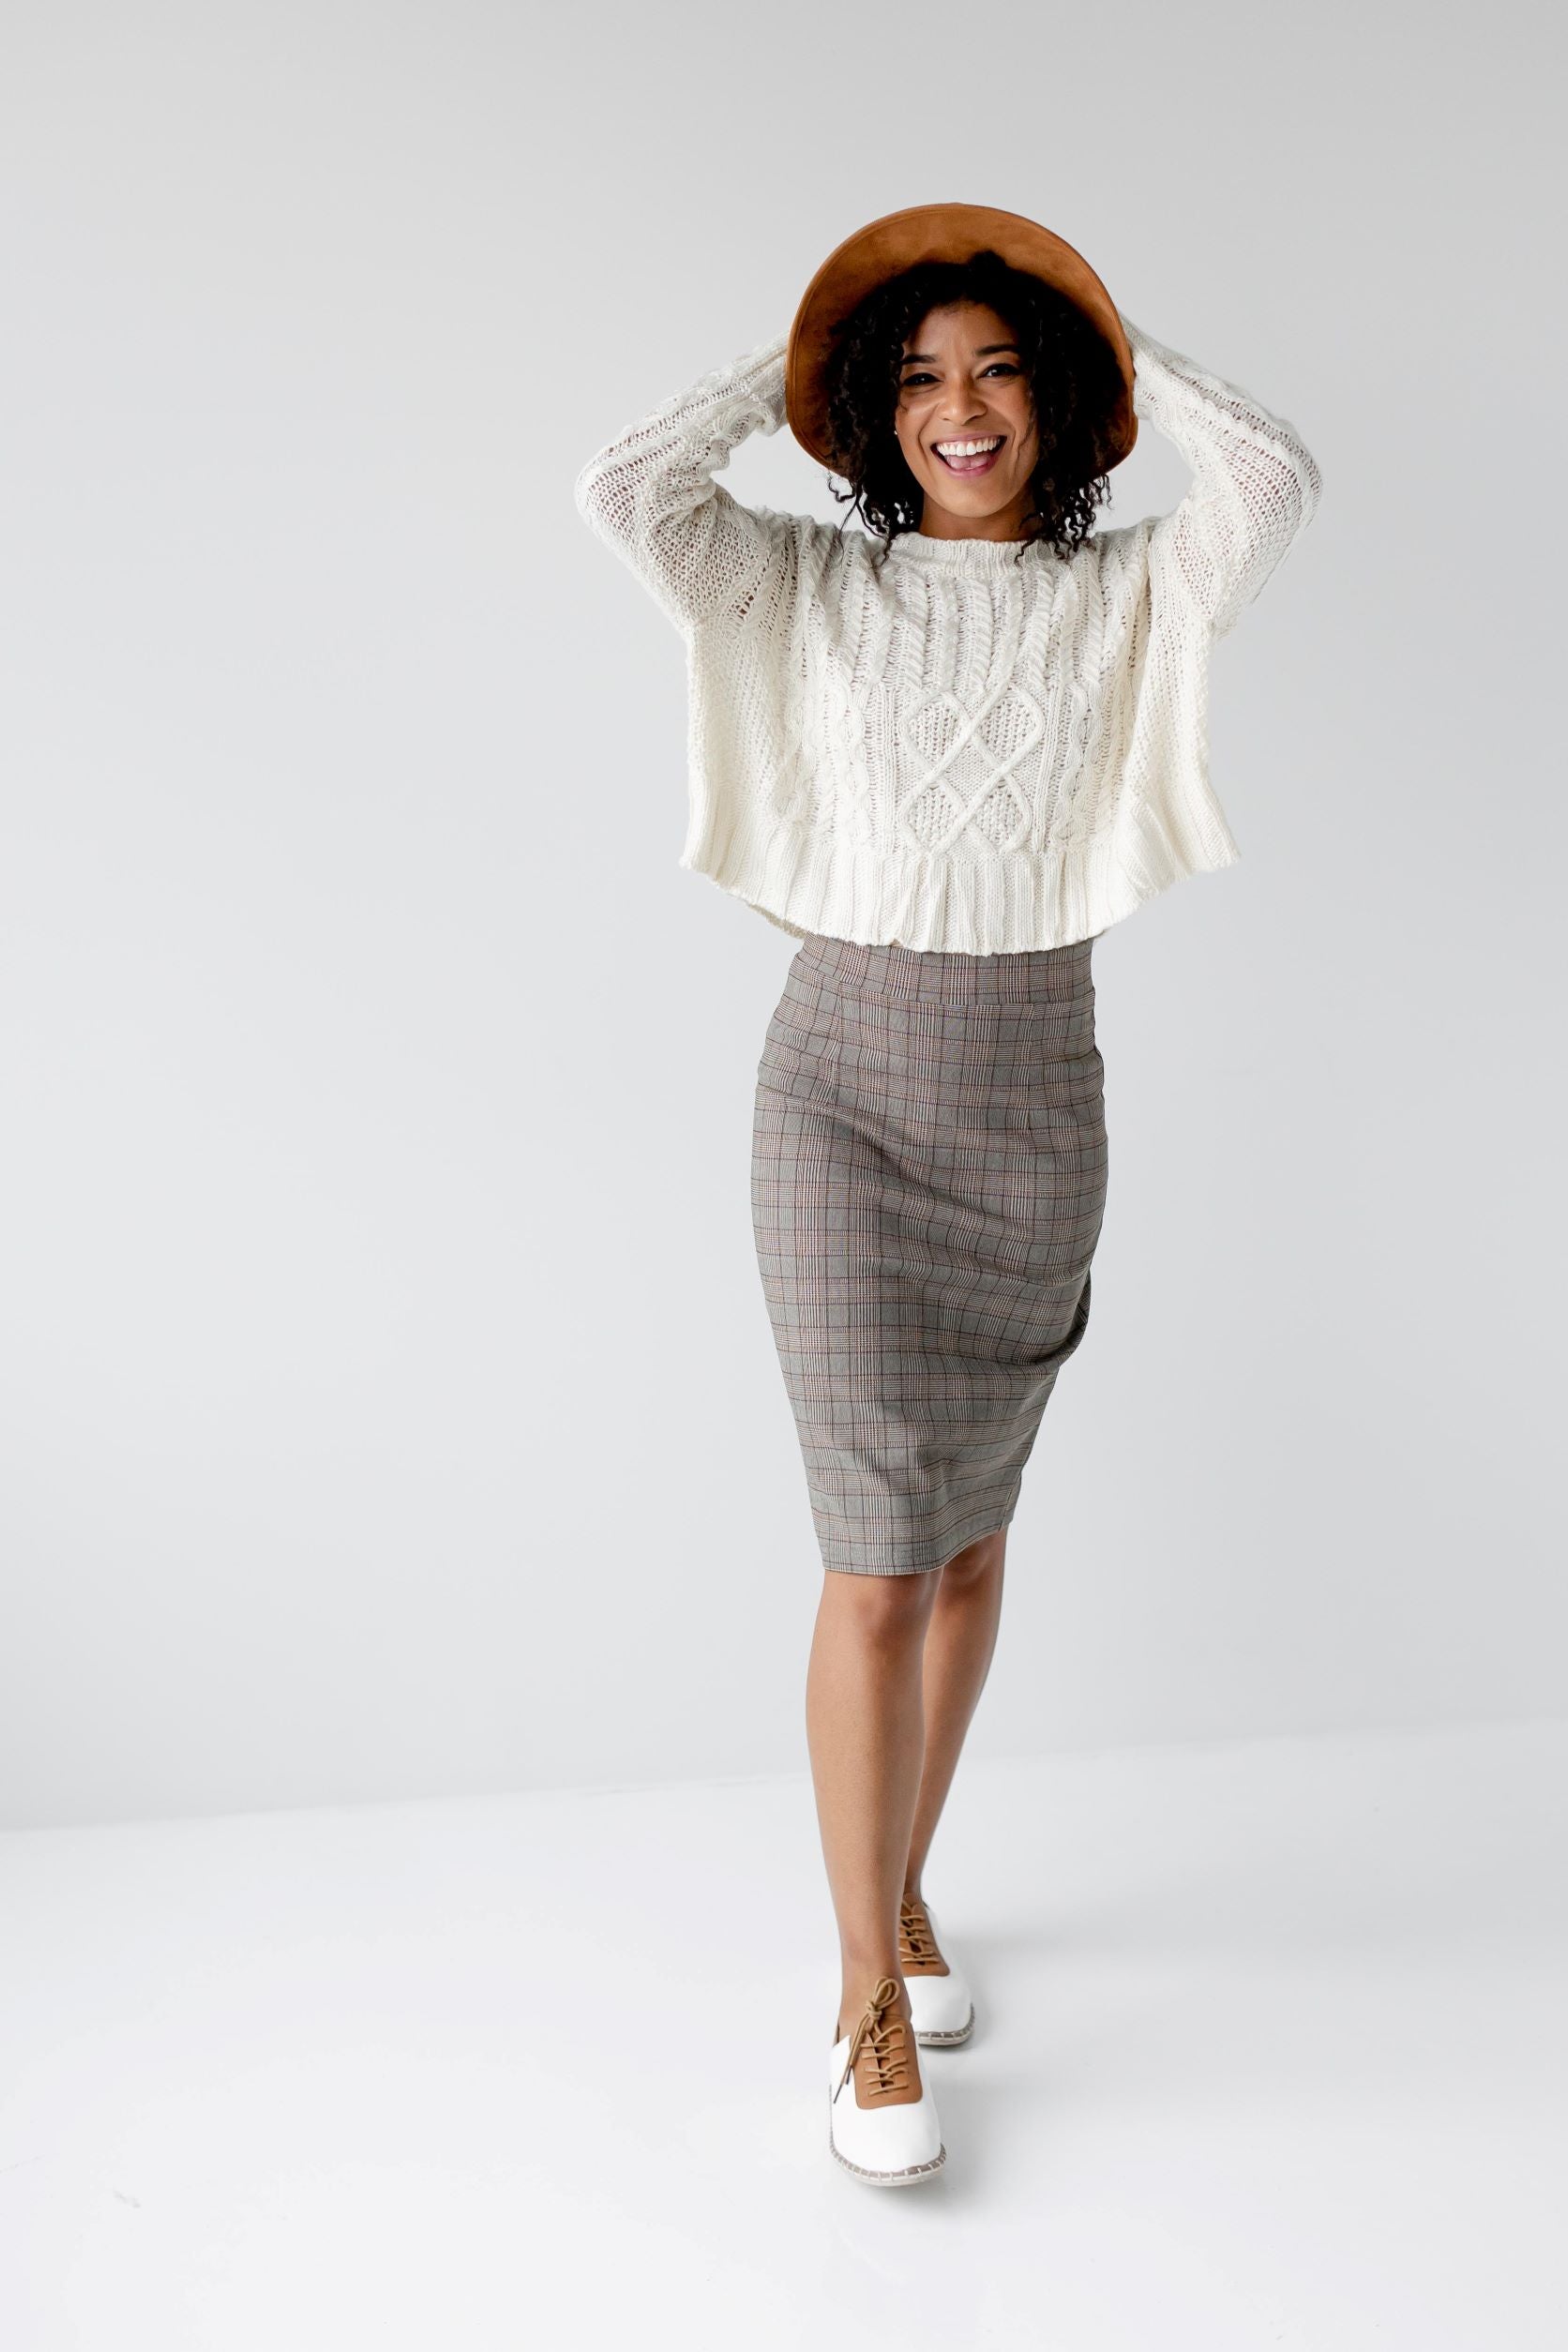 Modest Skirts | Modest Skirt Outfits | The Main Street Exchange – Page 3